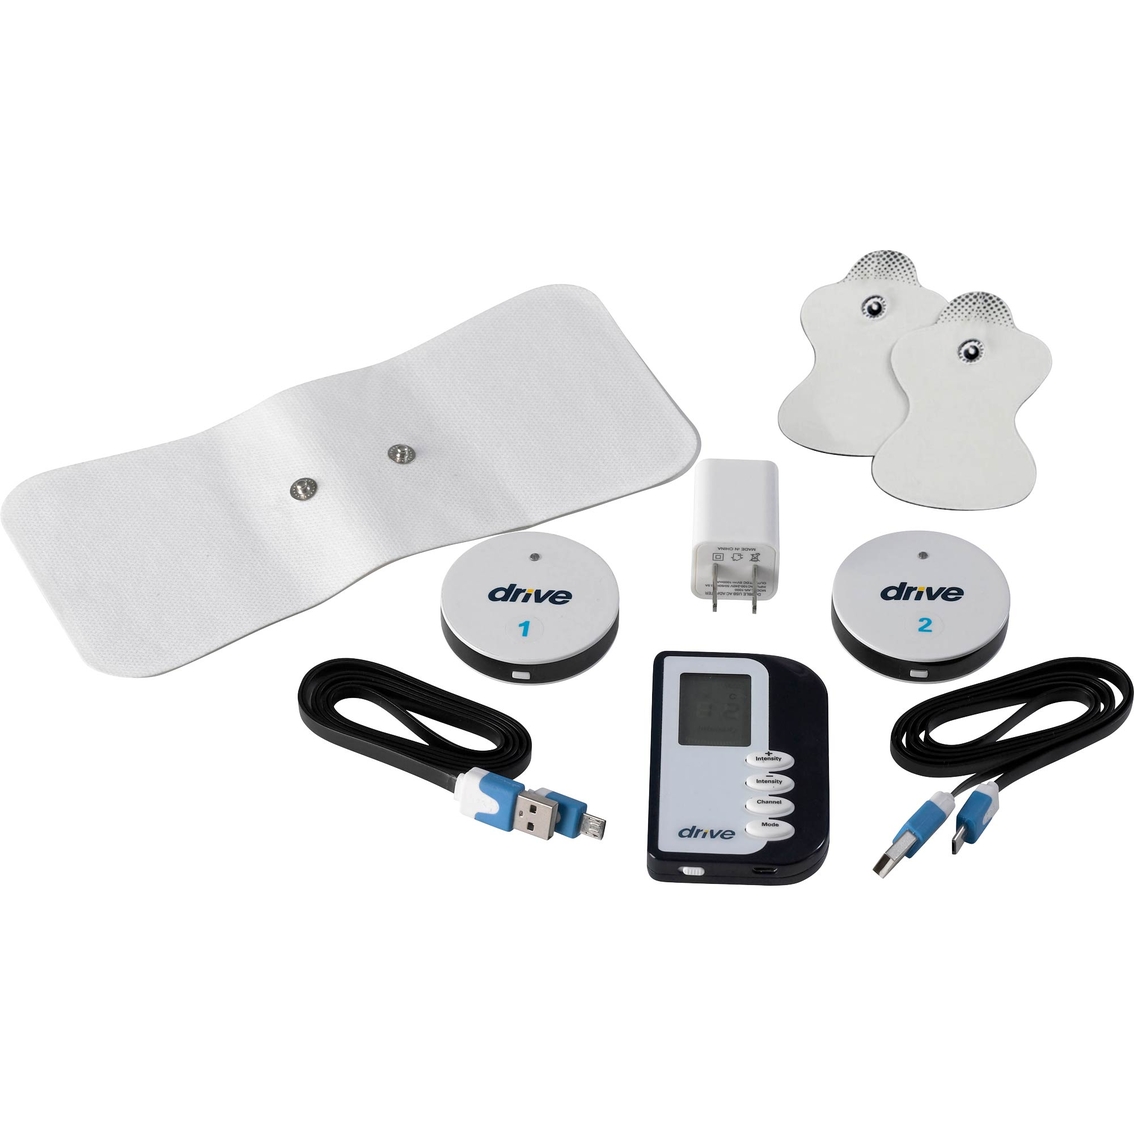 Drive Medical PainAway Wireless TENS Unit - Image 2 of 4